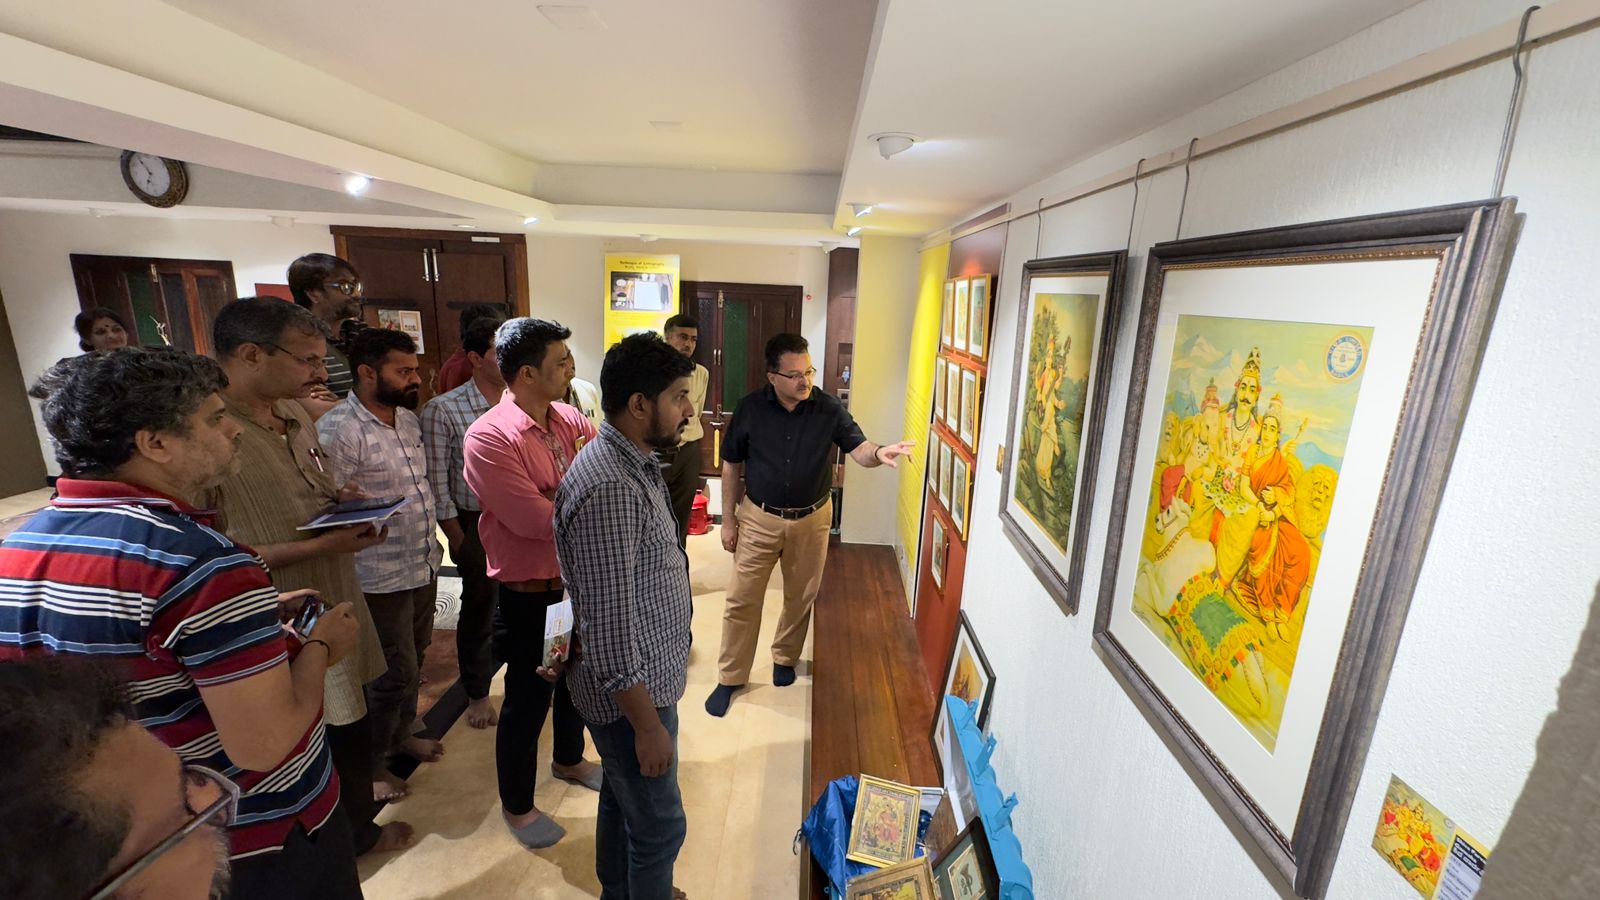 Divine Lithography - Exhibition of rare lithographs from 17th to 19th May at Aditi Gallery, Udupi.